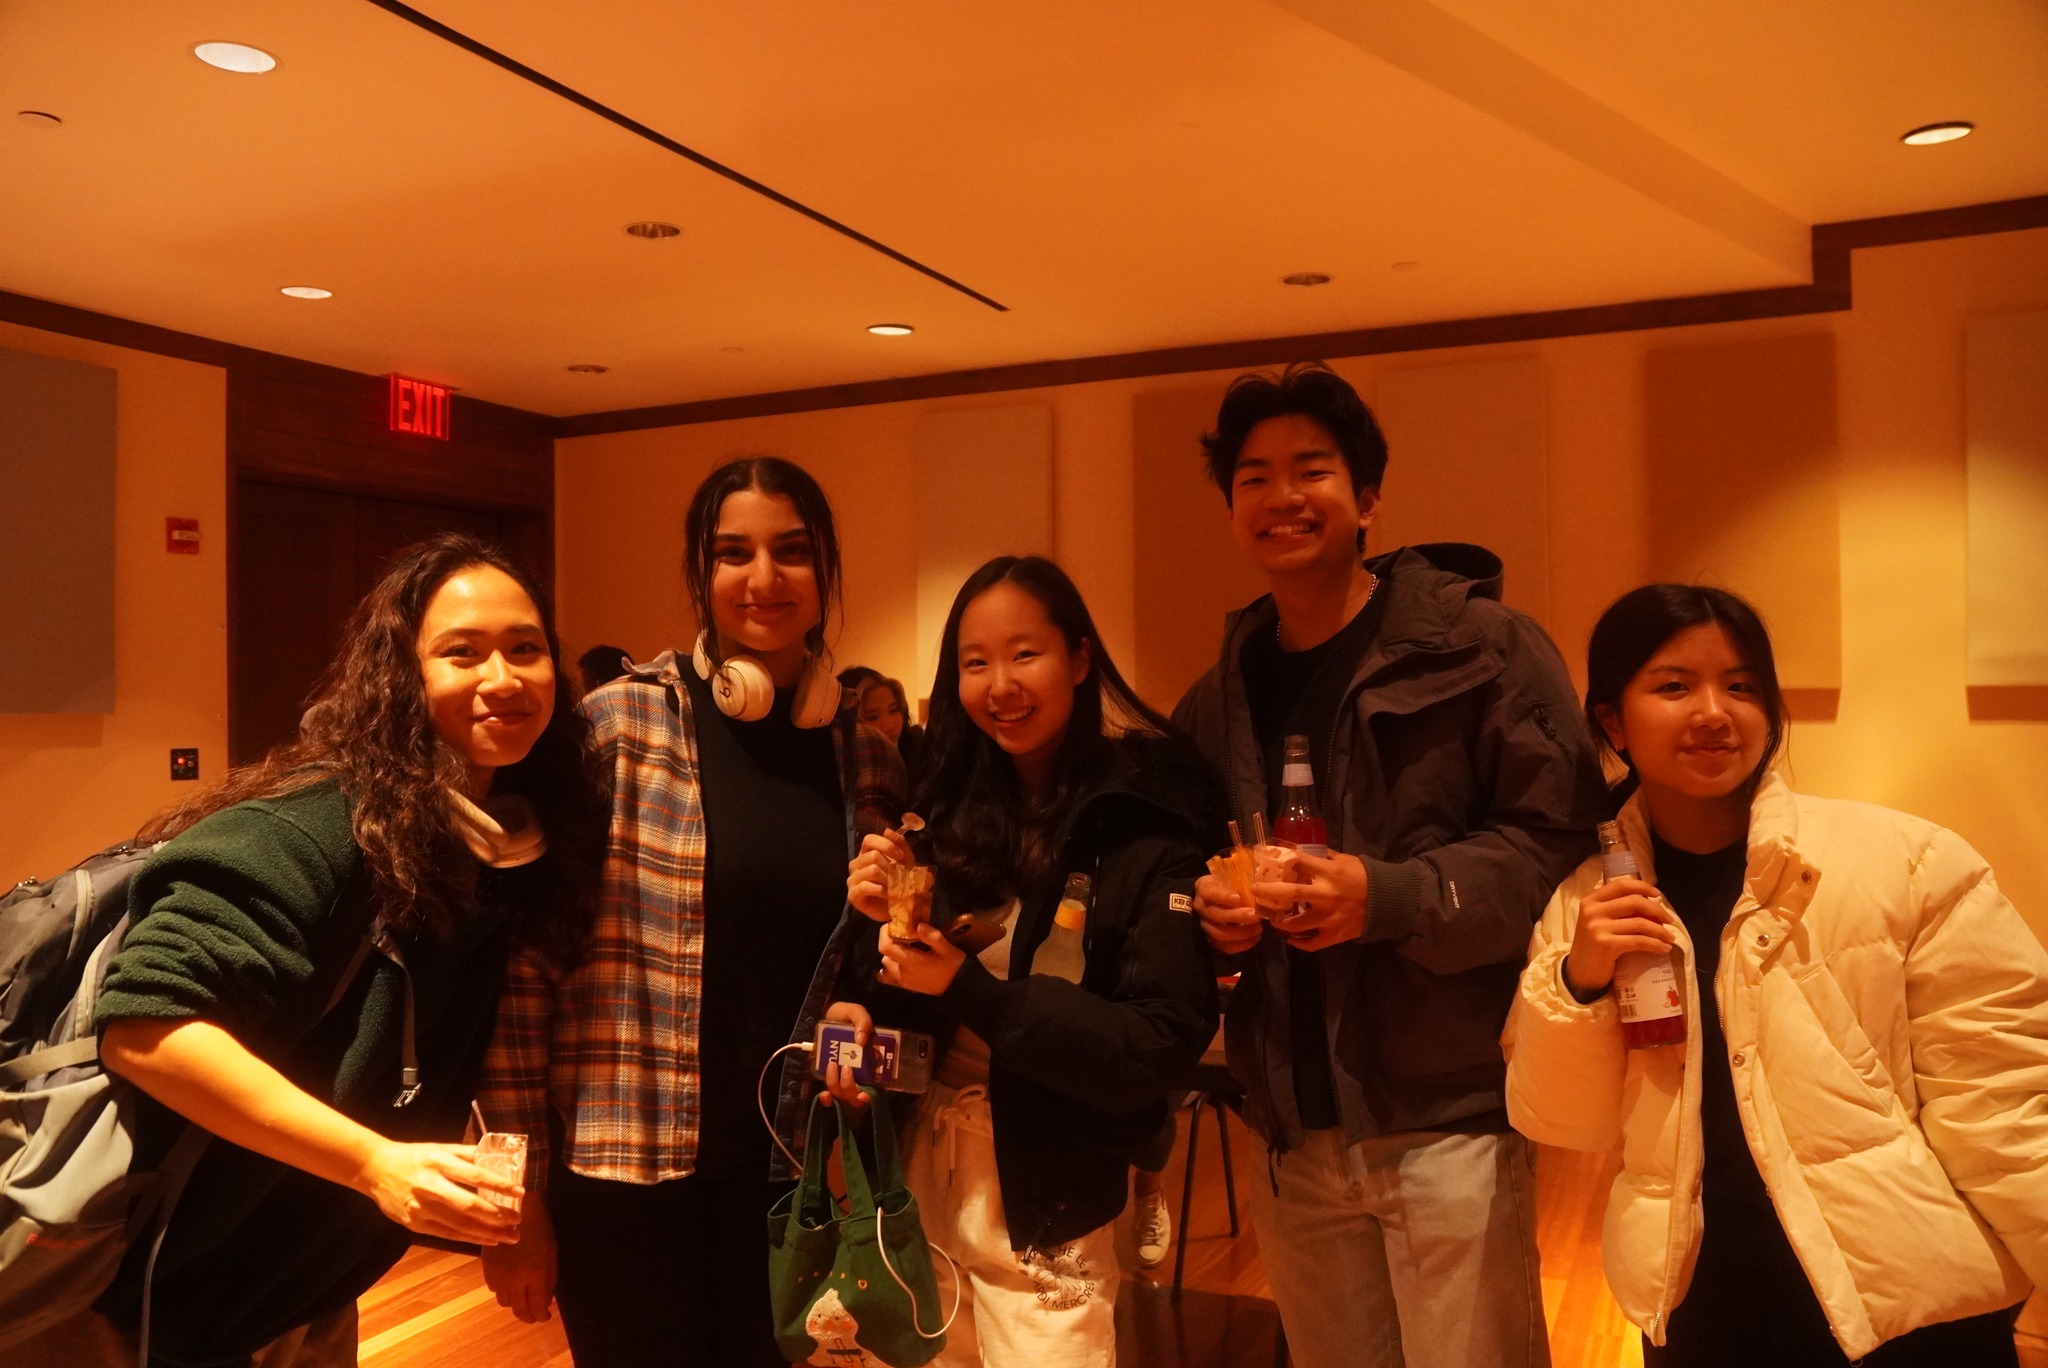 Students smiling for the camera, holding mousse cups and yuzu drinks.